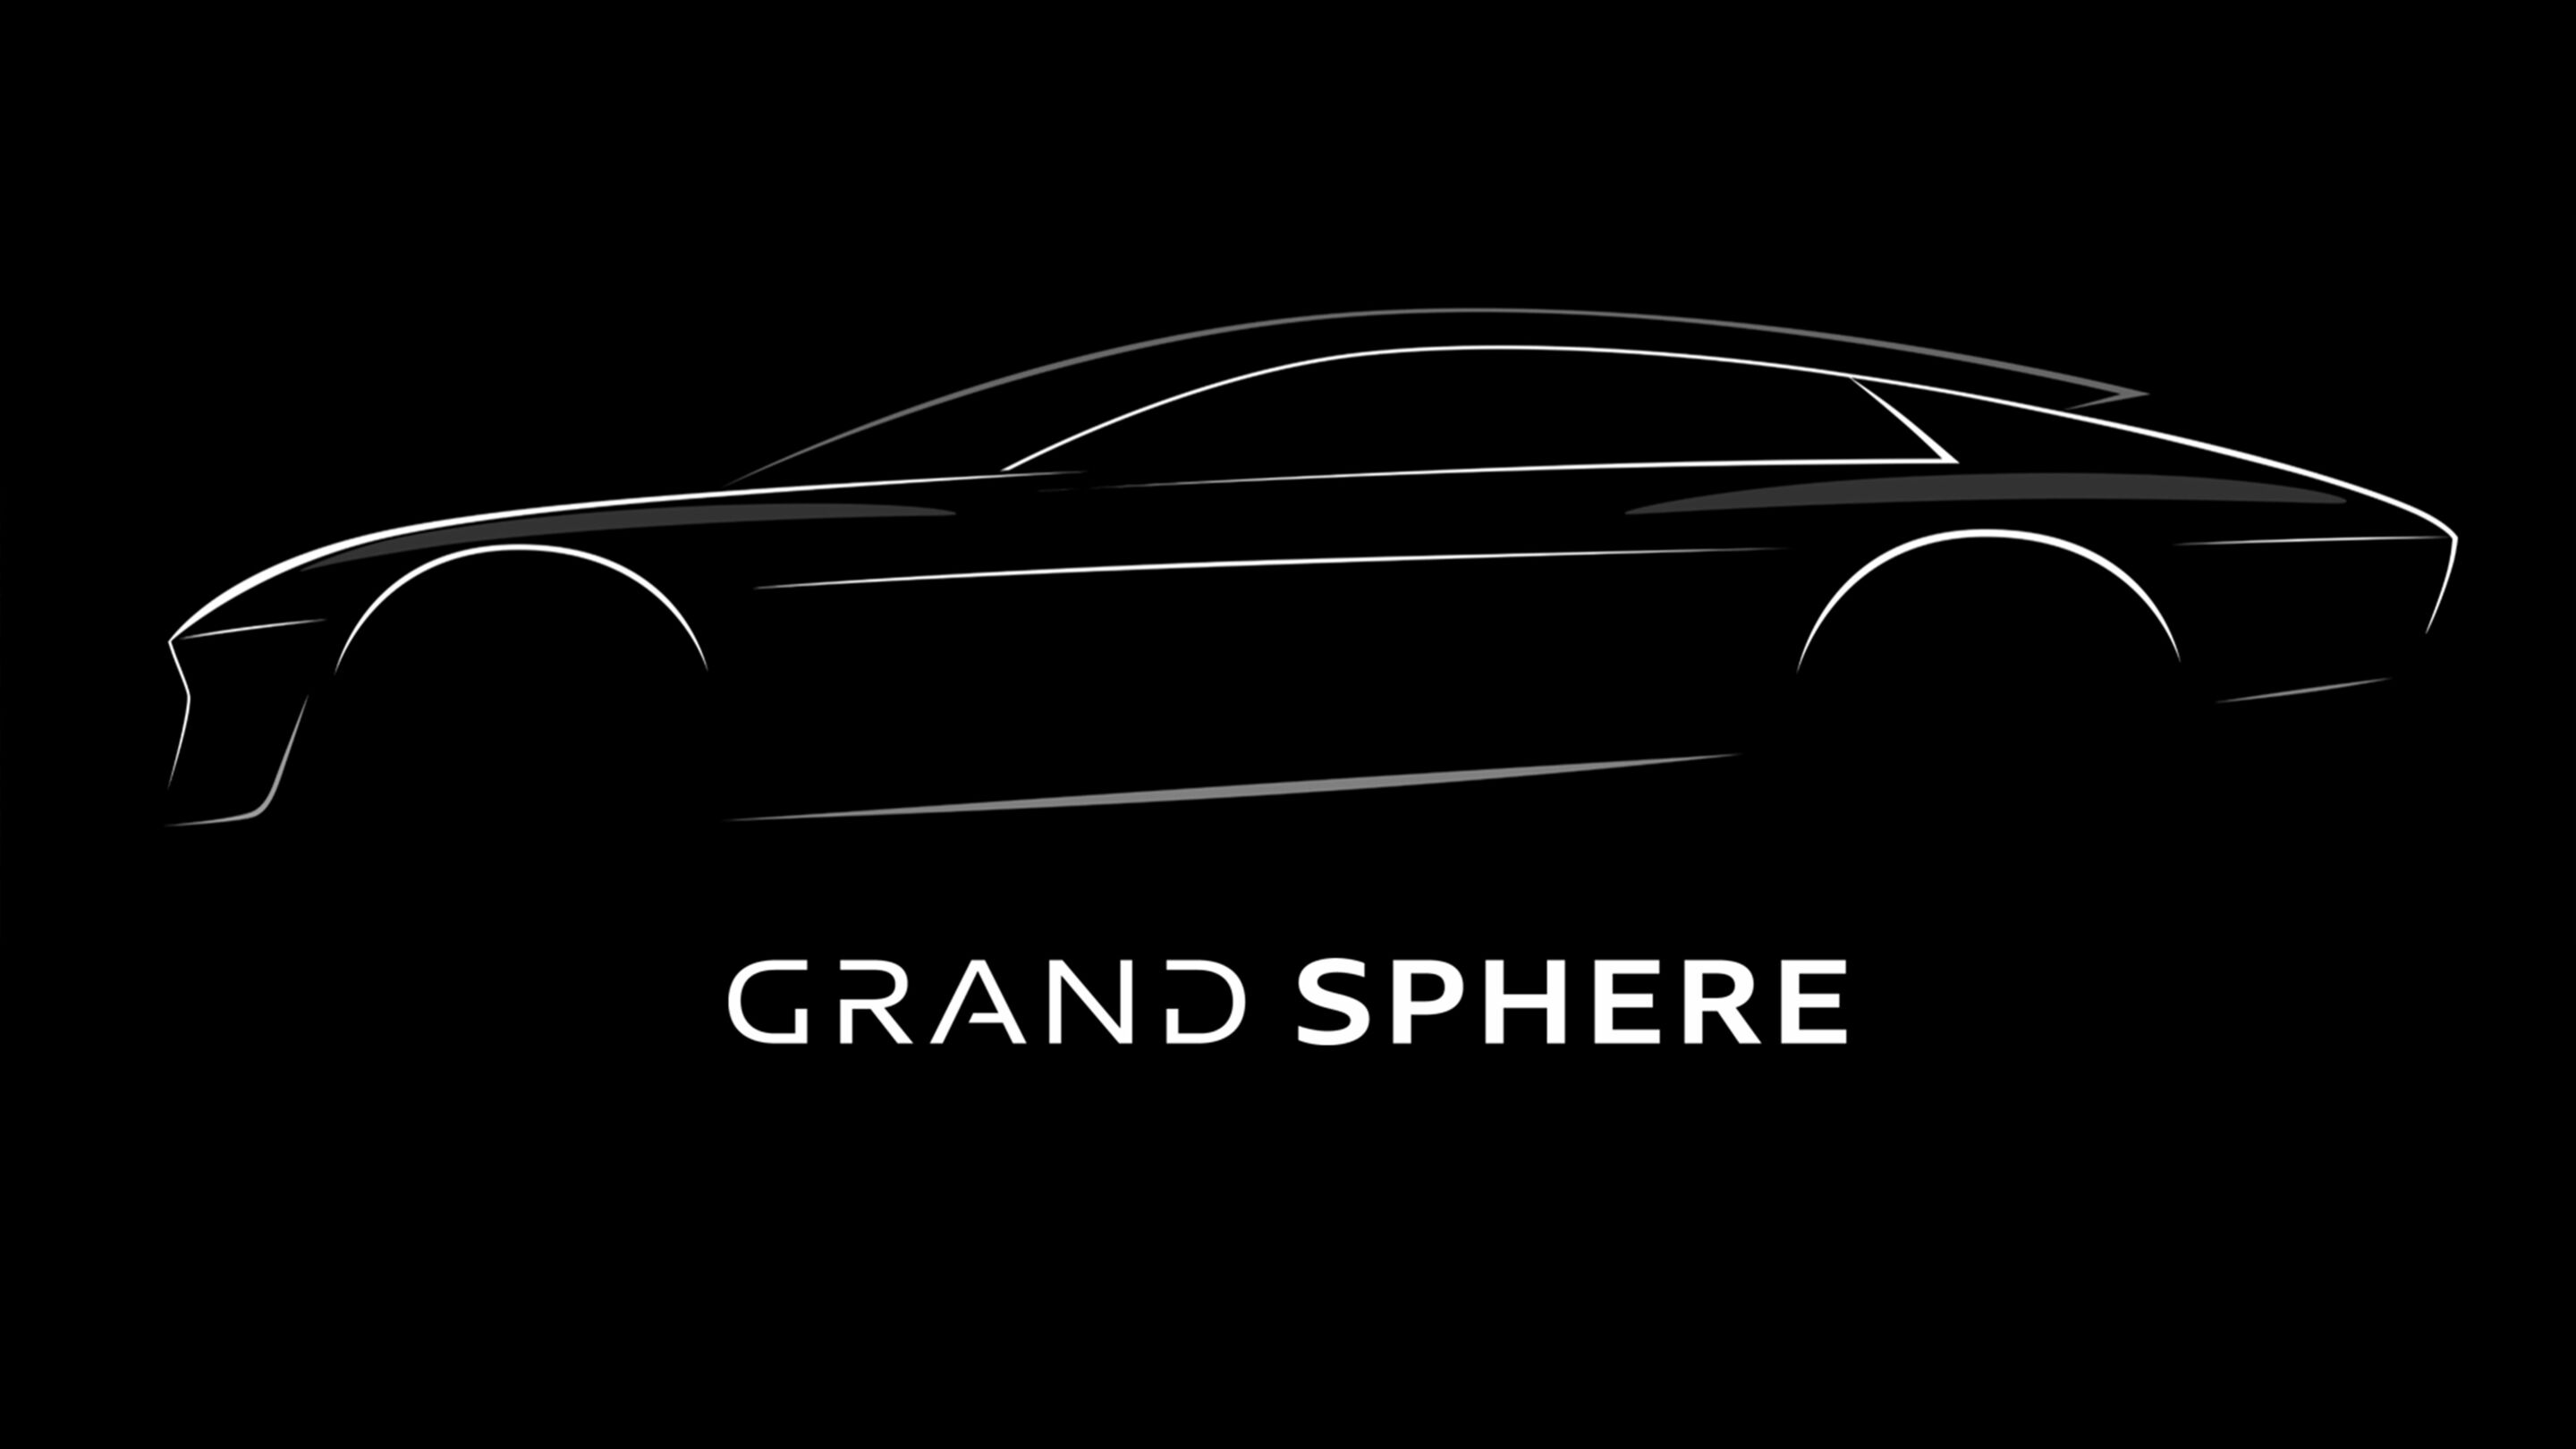 Save the date: the online world premiere of the  Audi grandsphere concept